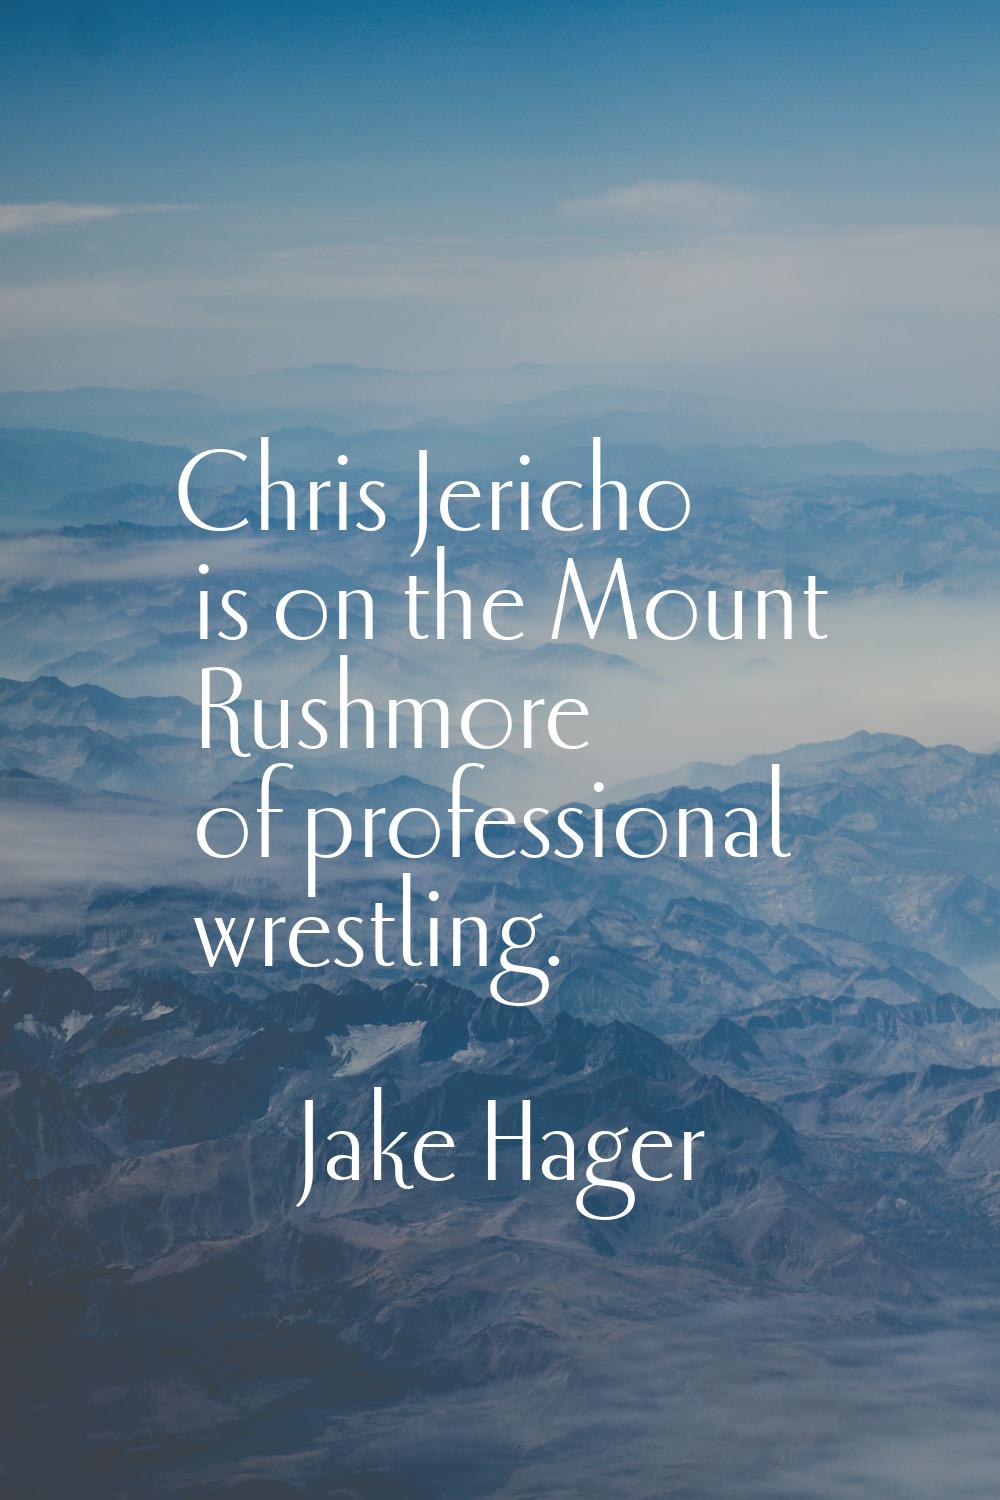 Chris Jericho is on the Mount Rushmore of professional wrestling.